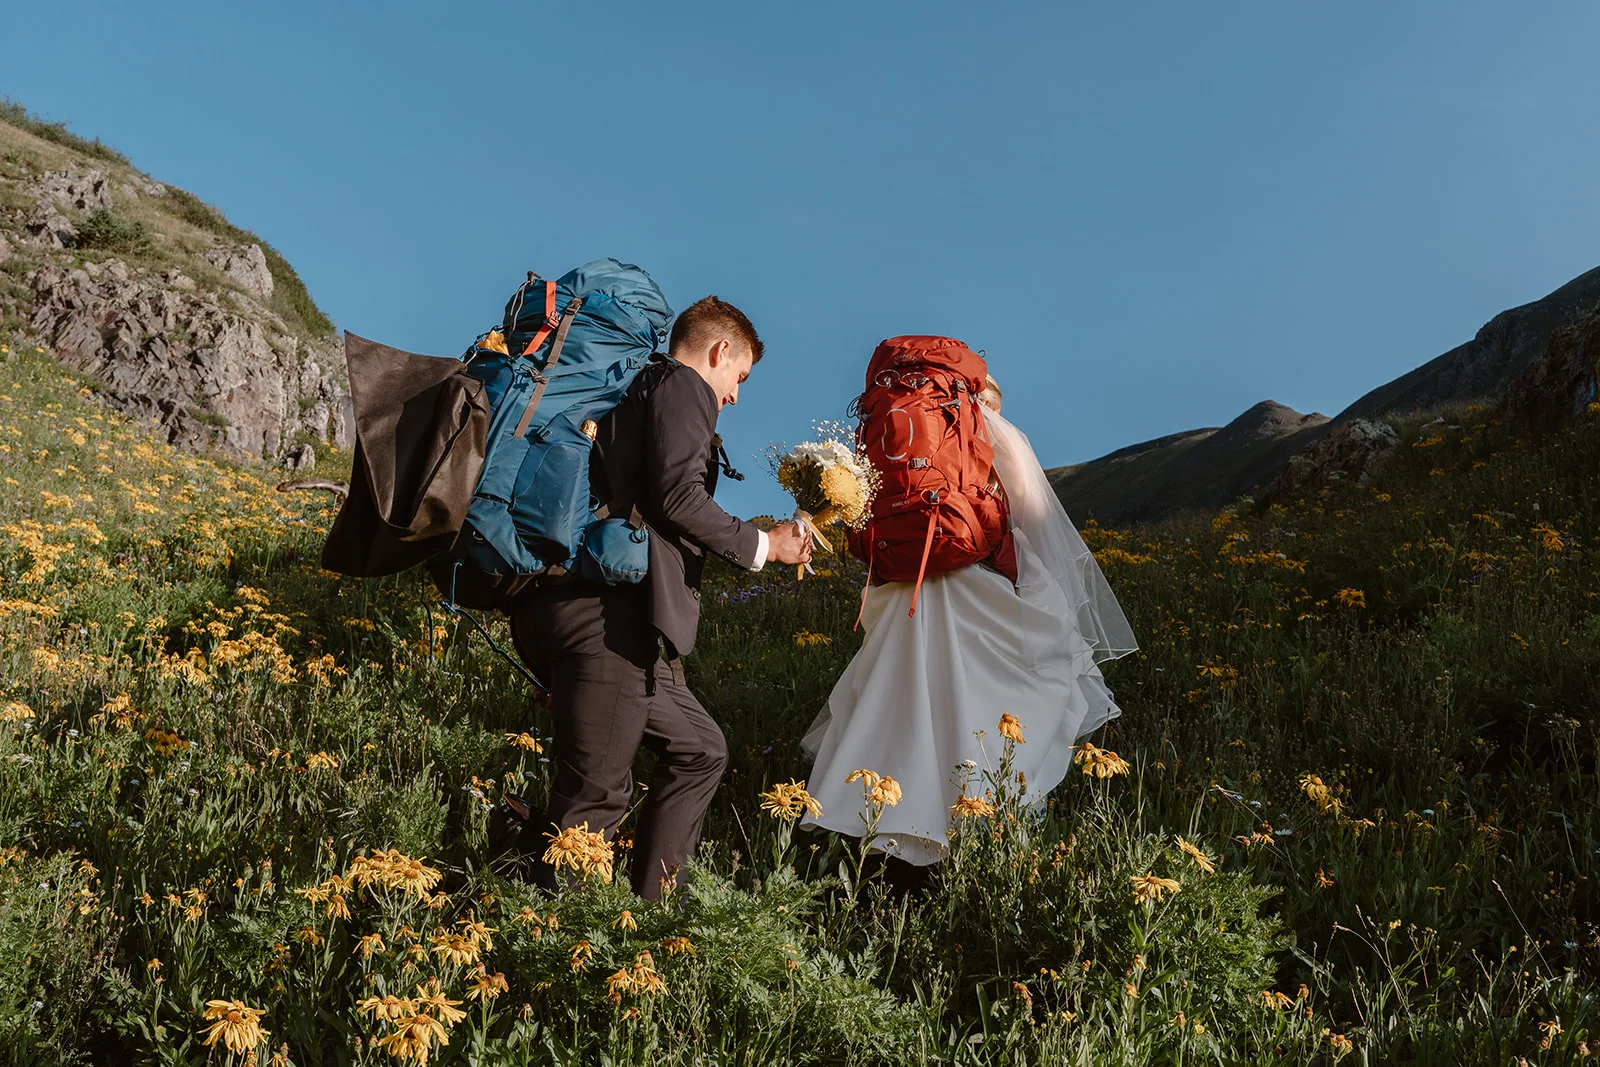 Harriet and Mathew explored the San Juan Mountains during their elopement day, but they wished they'd booked more than eight hours of elopement day coverage.